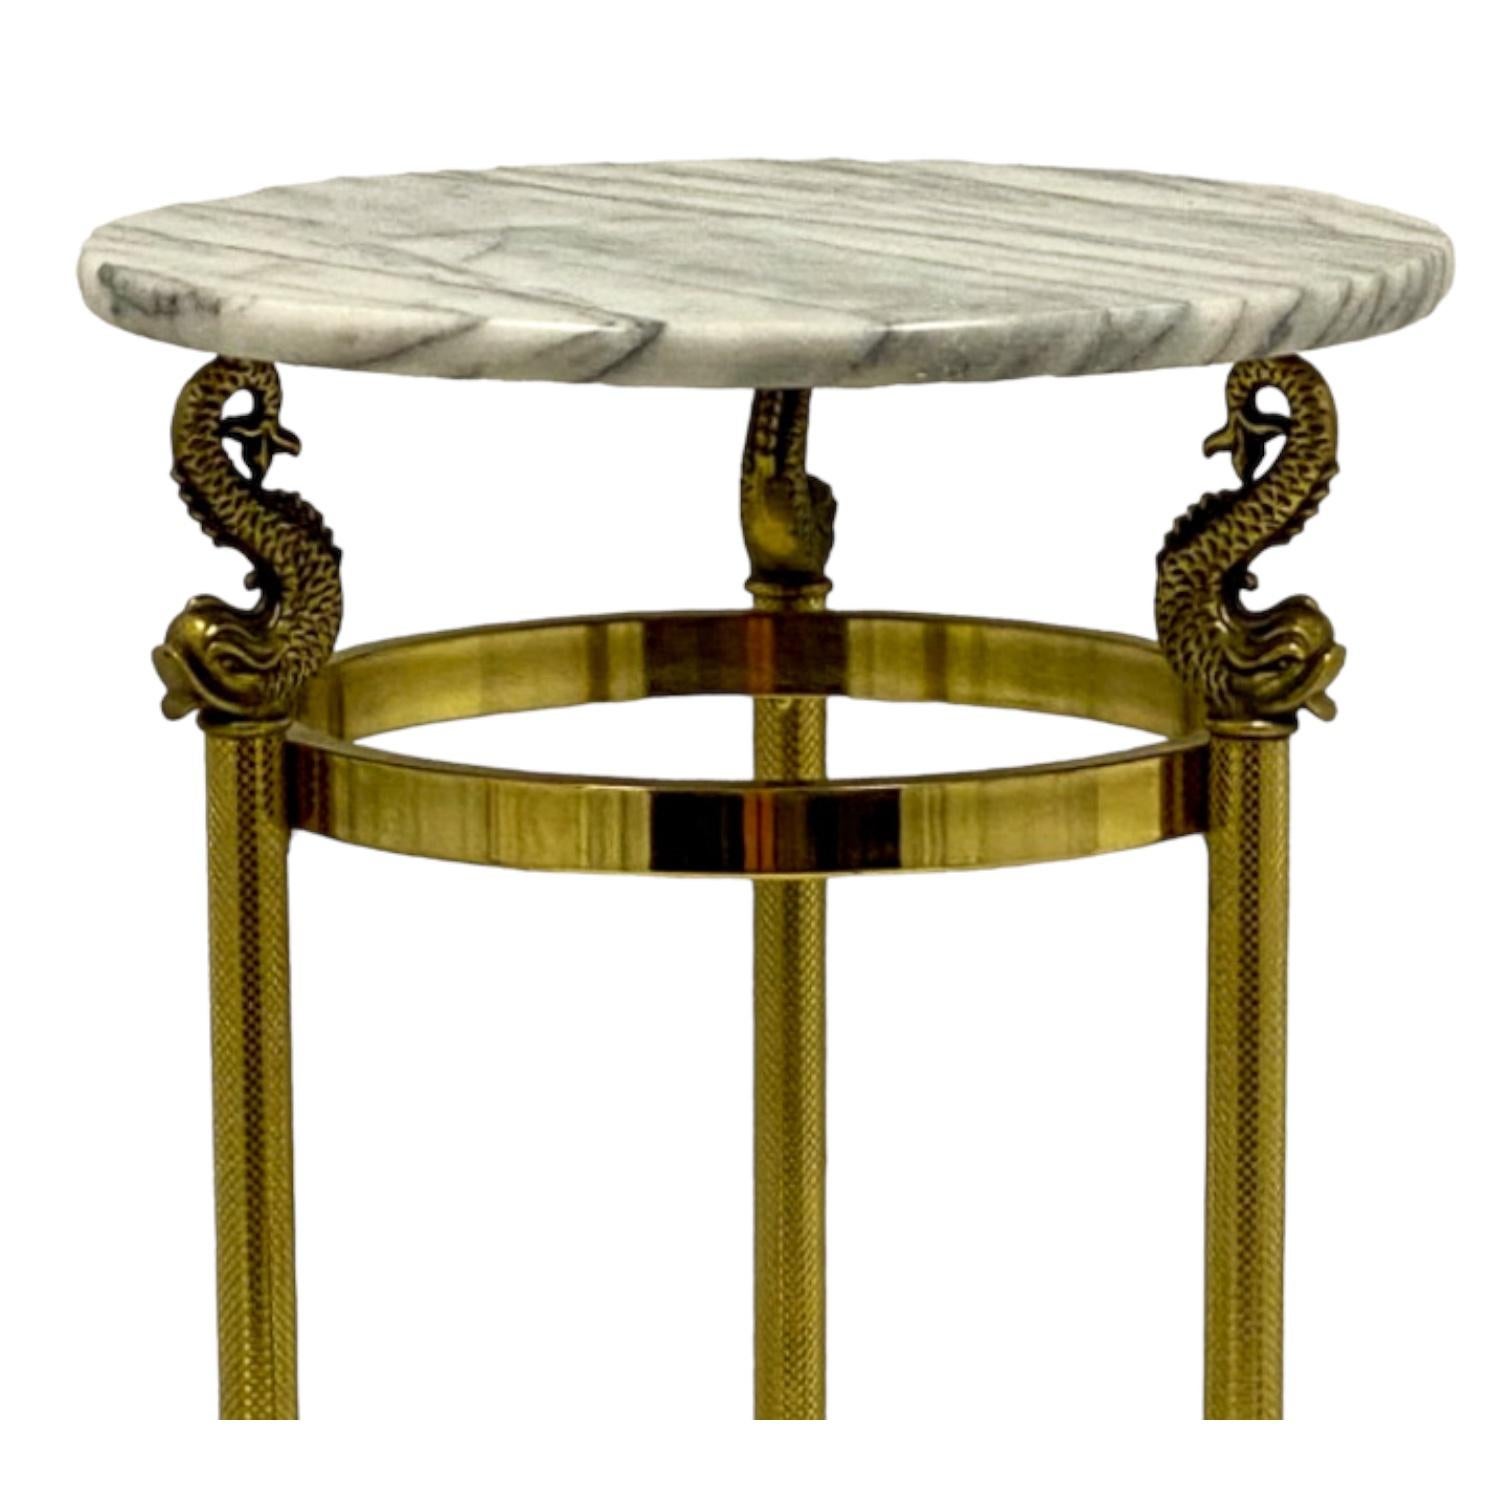 Neoclassical Neo-Classical Style Brass Dolphin And Marble Pedestal / Plant Stand / Table For Sale